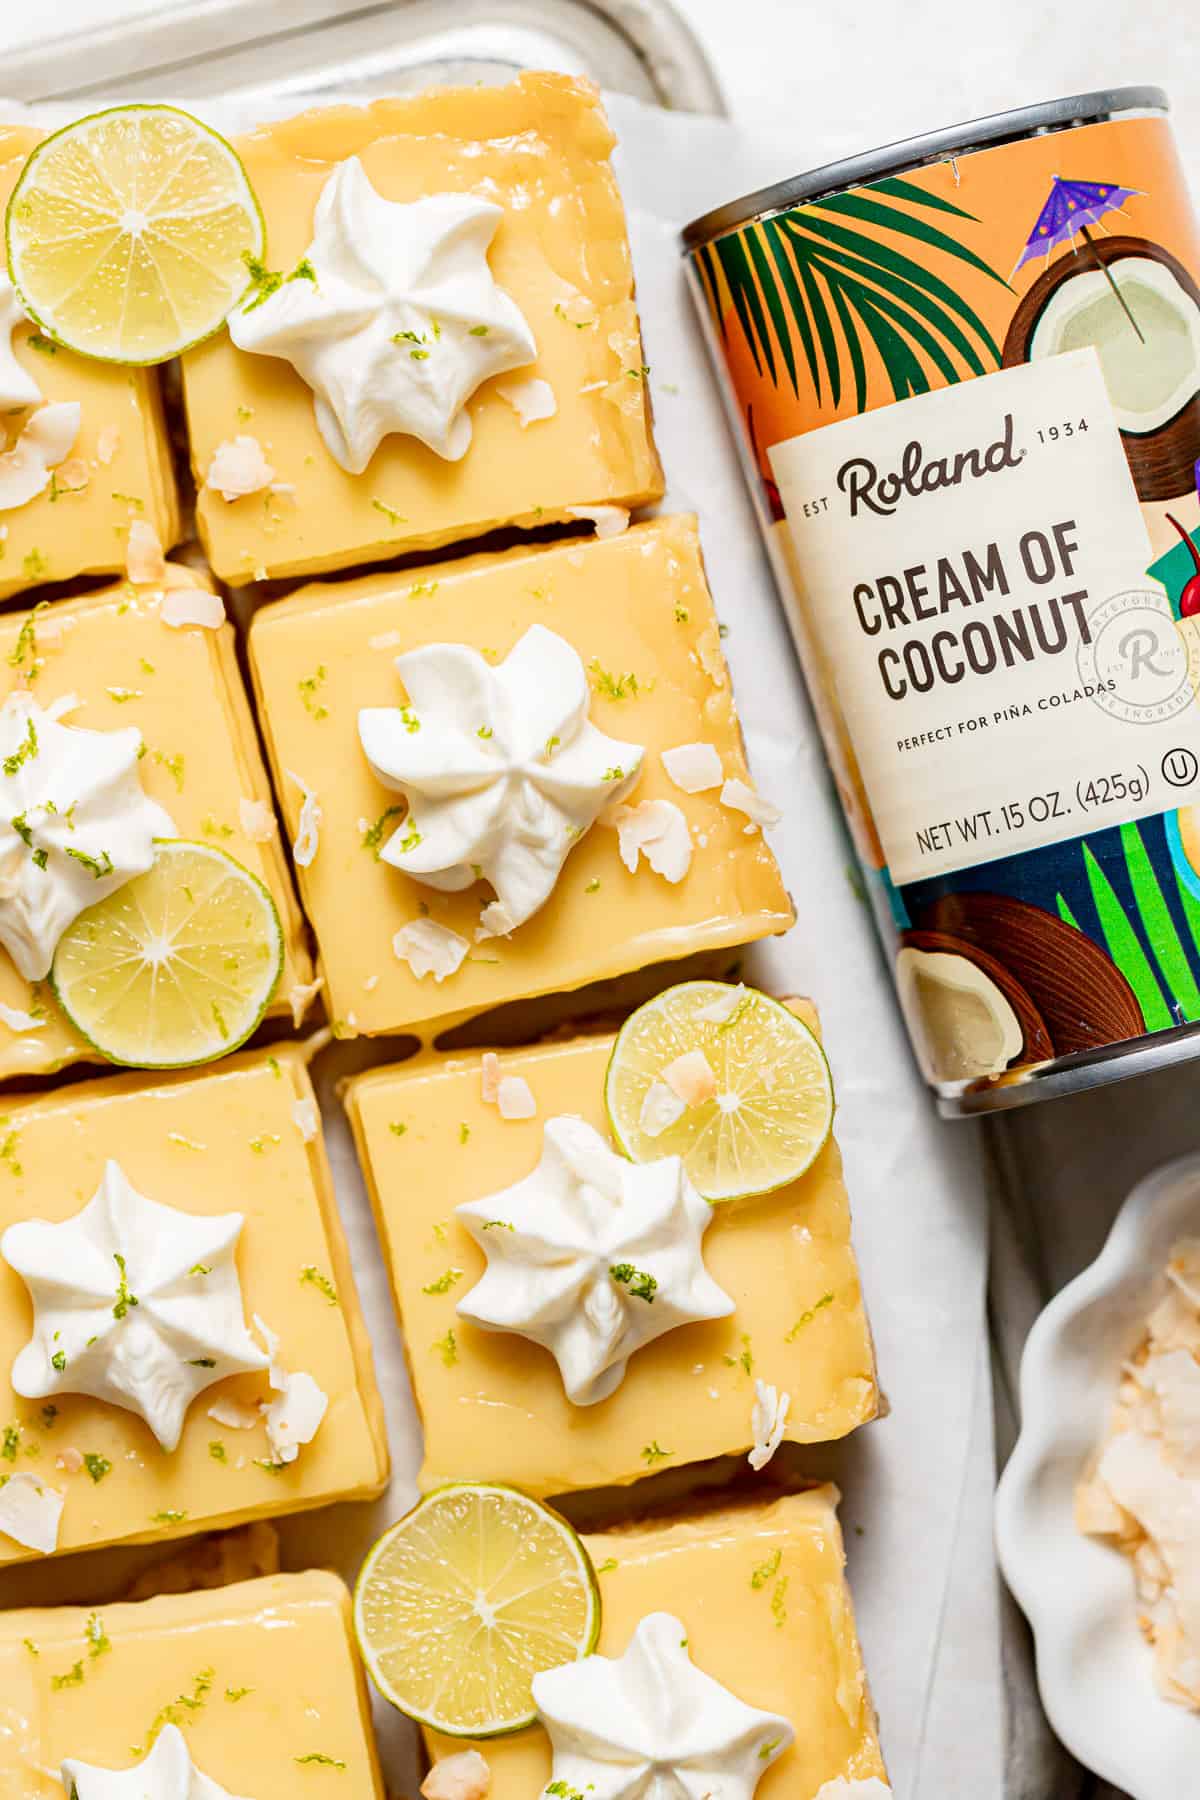 coconut key lime bars with dollops of whipped cream next to jar of Roland cream of coconut.